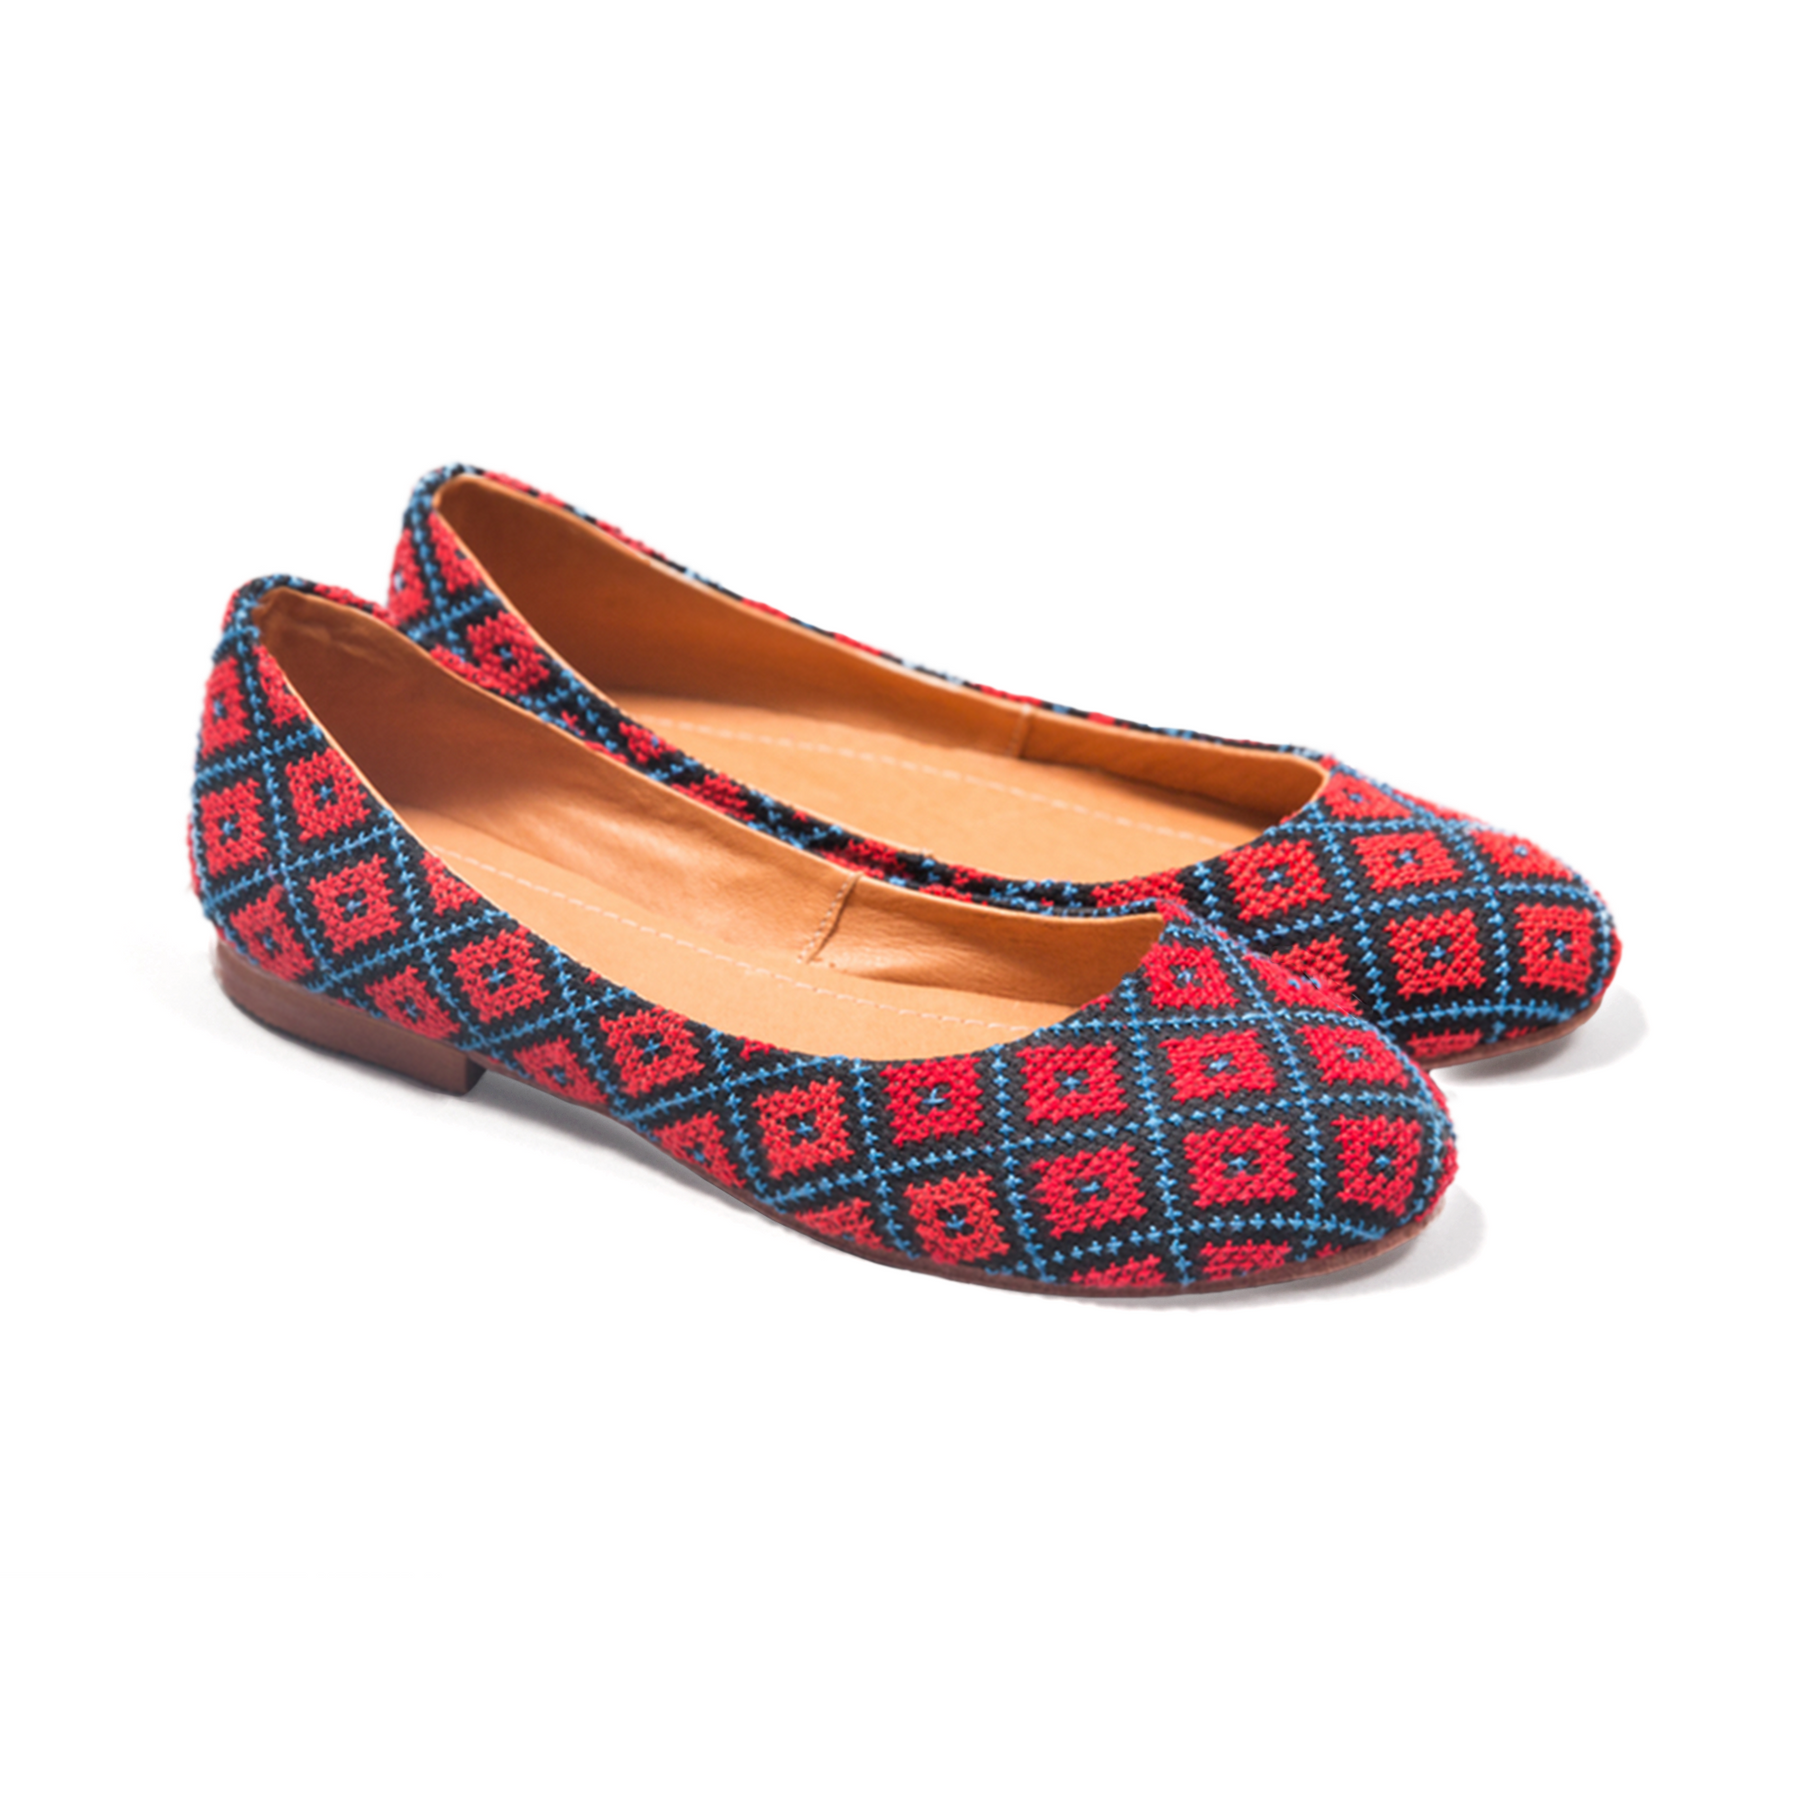 Shop Tatreez Hand-Embroidered Shoes for Women - Darzah